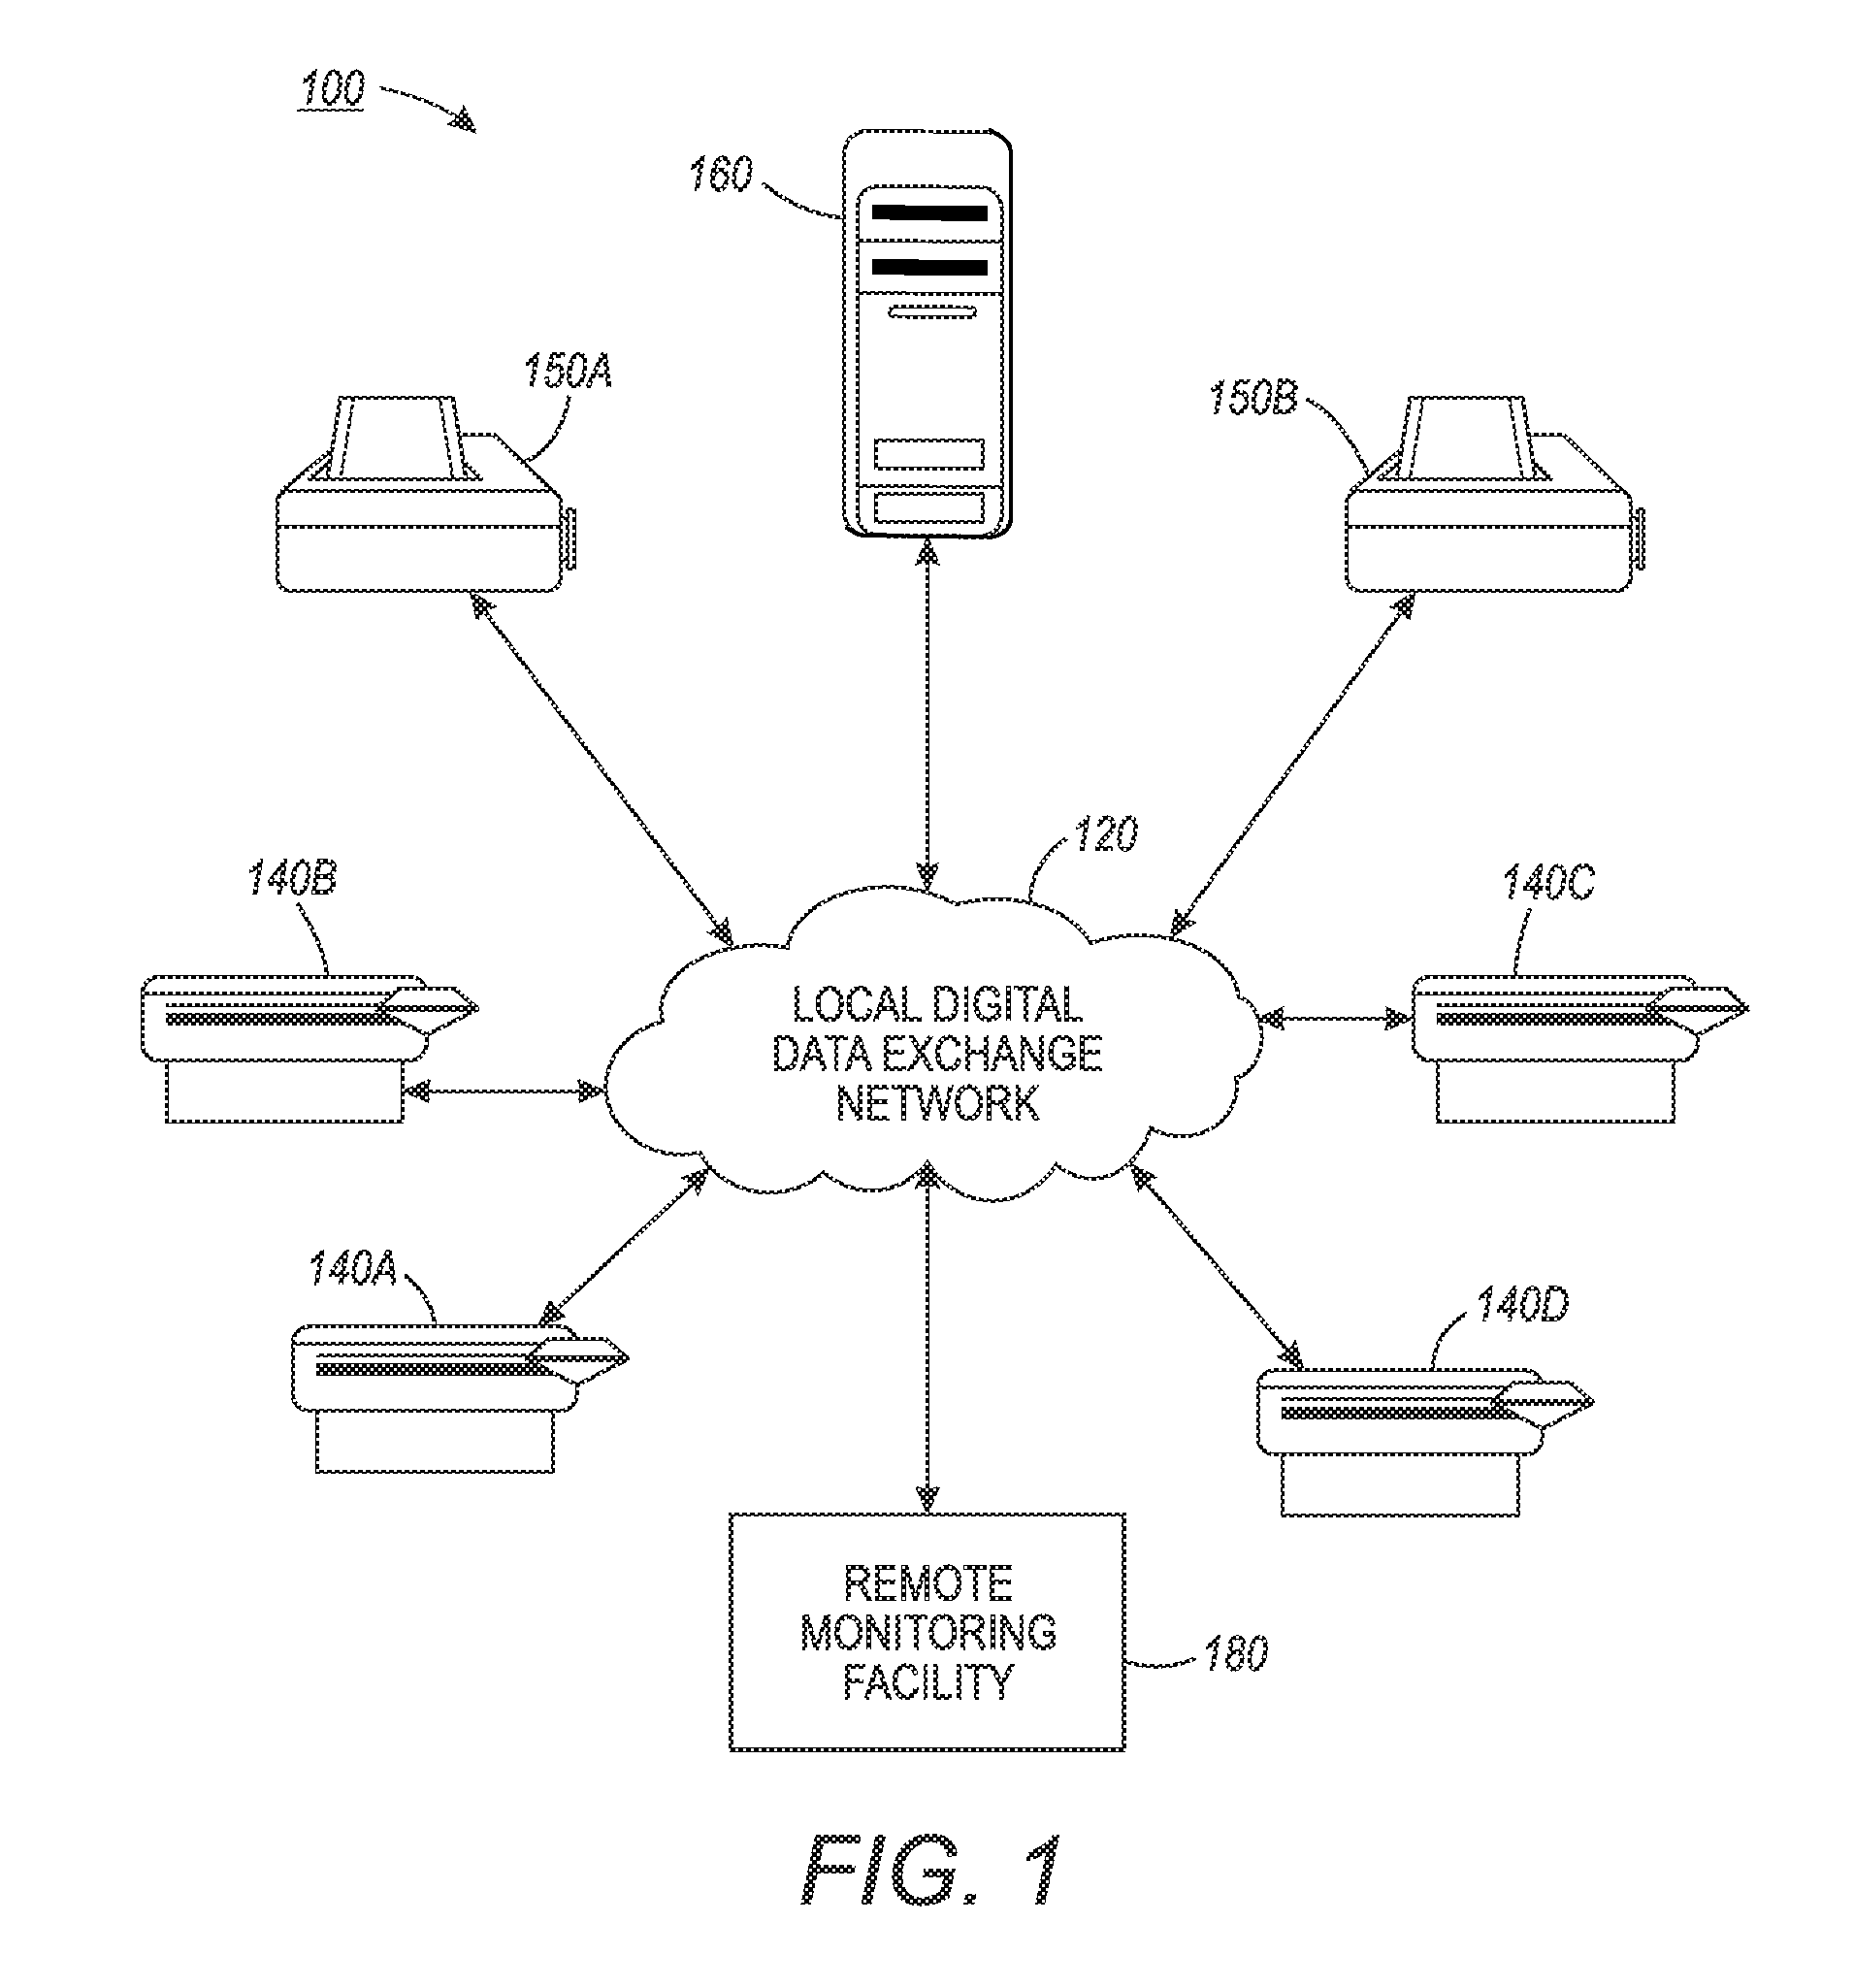 Systems and methods for implementing a supplies fulfillment opportunity for non-managed devices